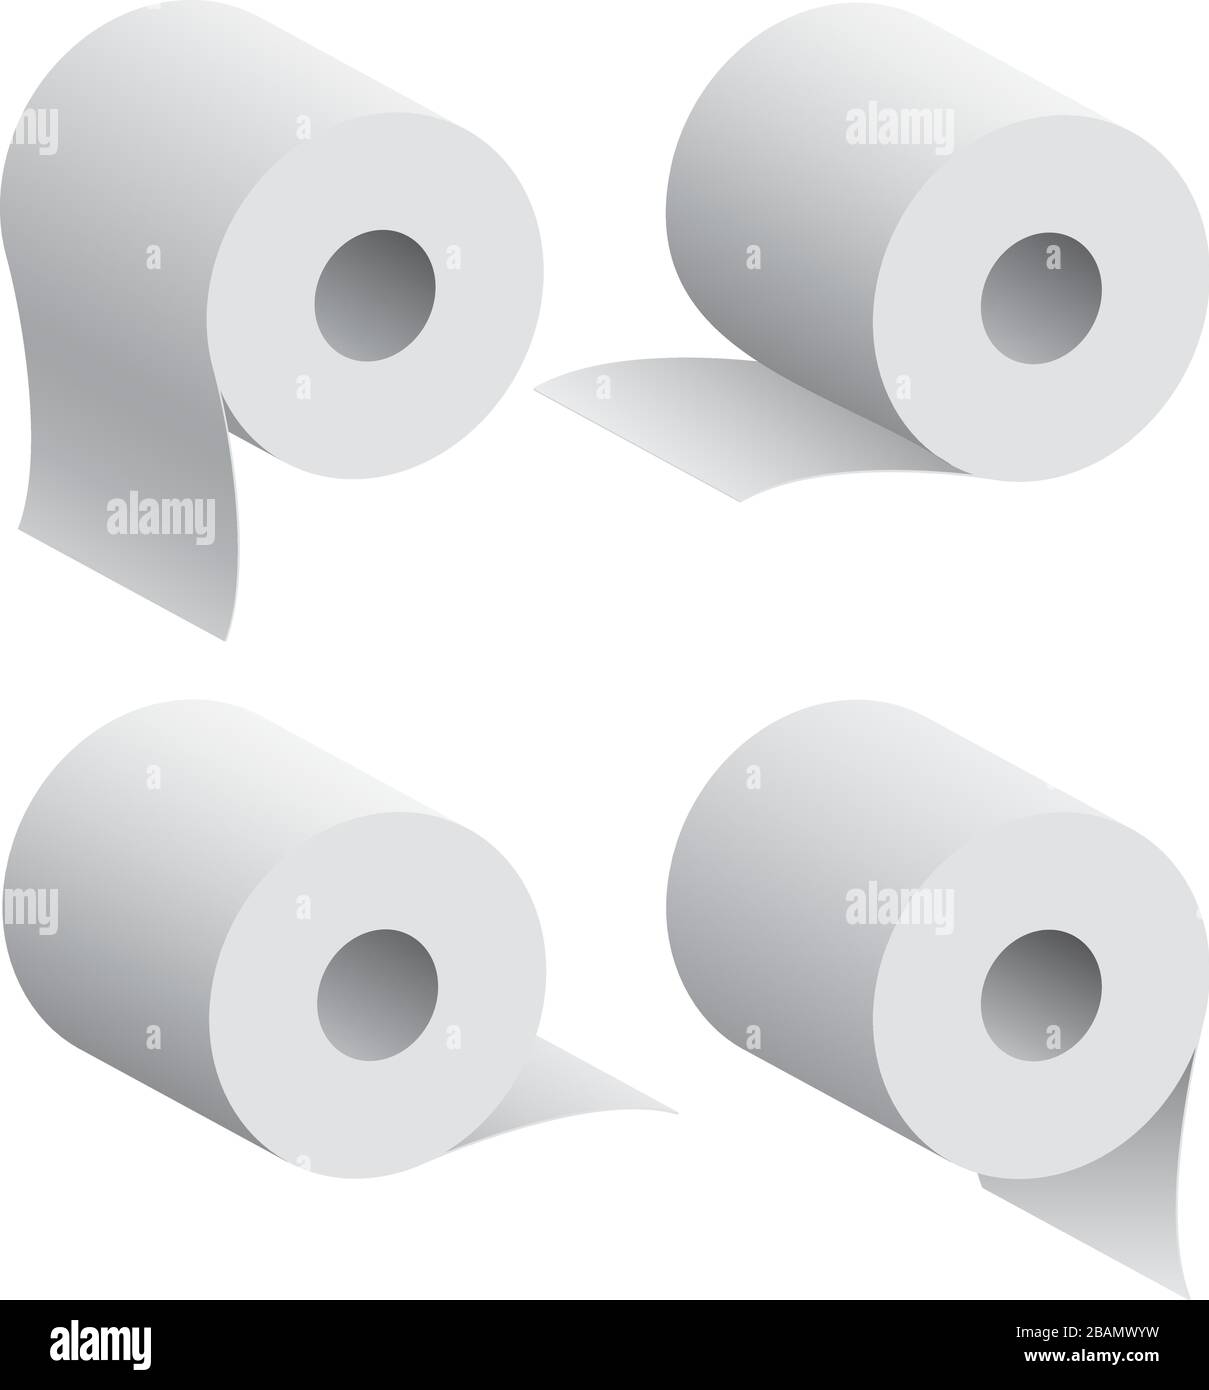 Toilet Paper Rolls Realistic 3D Isolated Vector Illustration Stock Vector